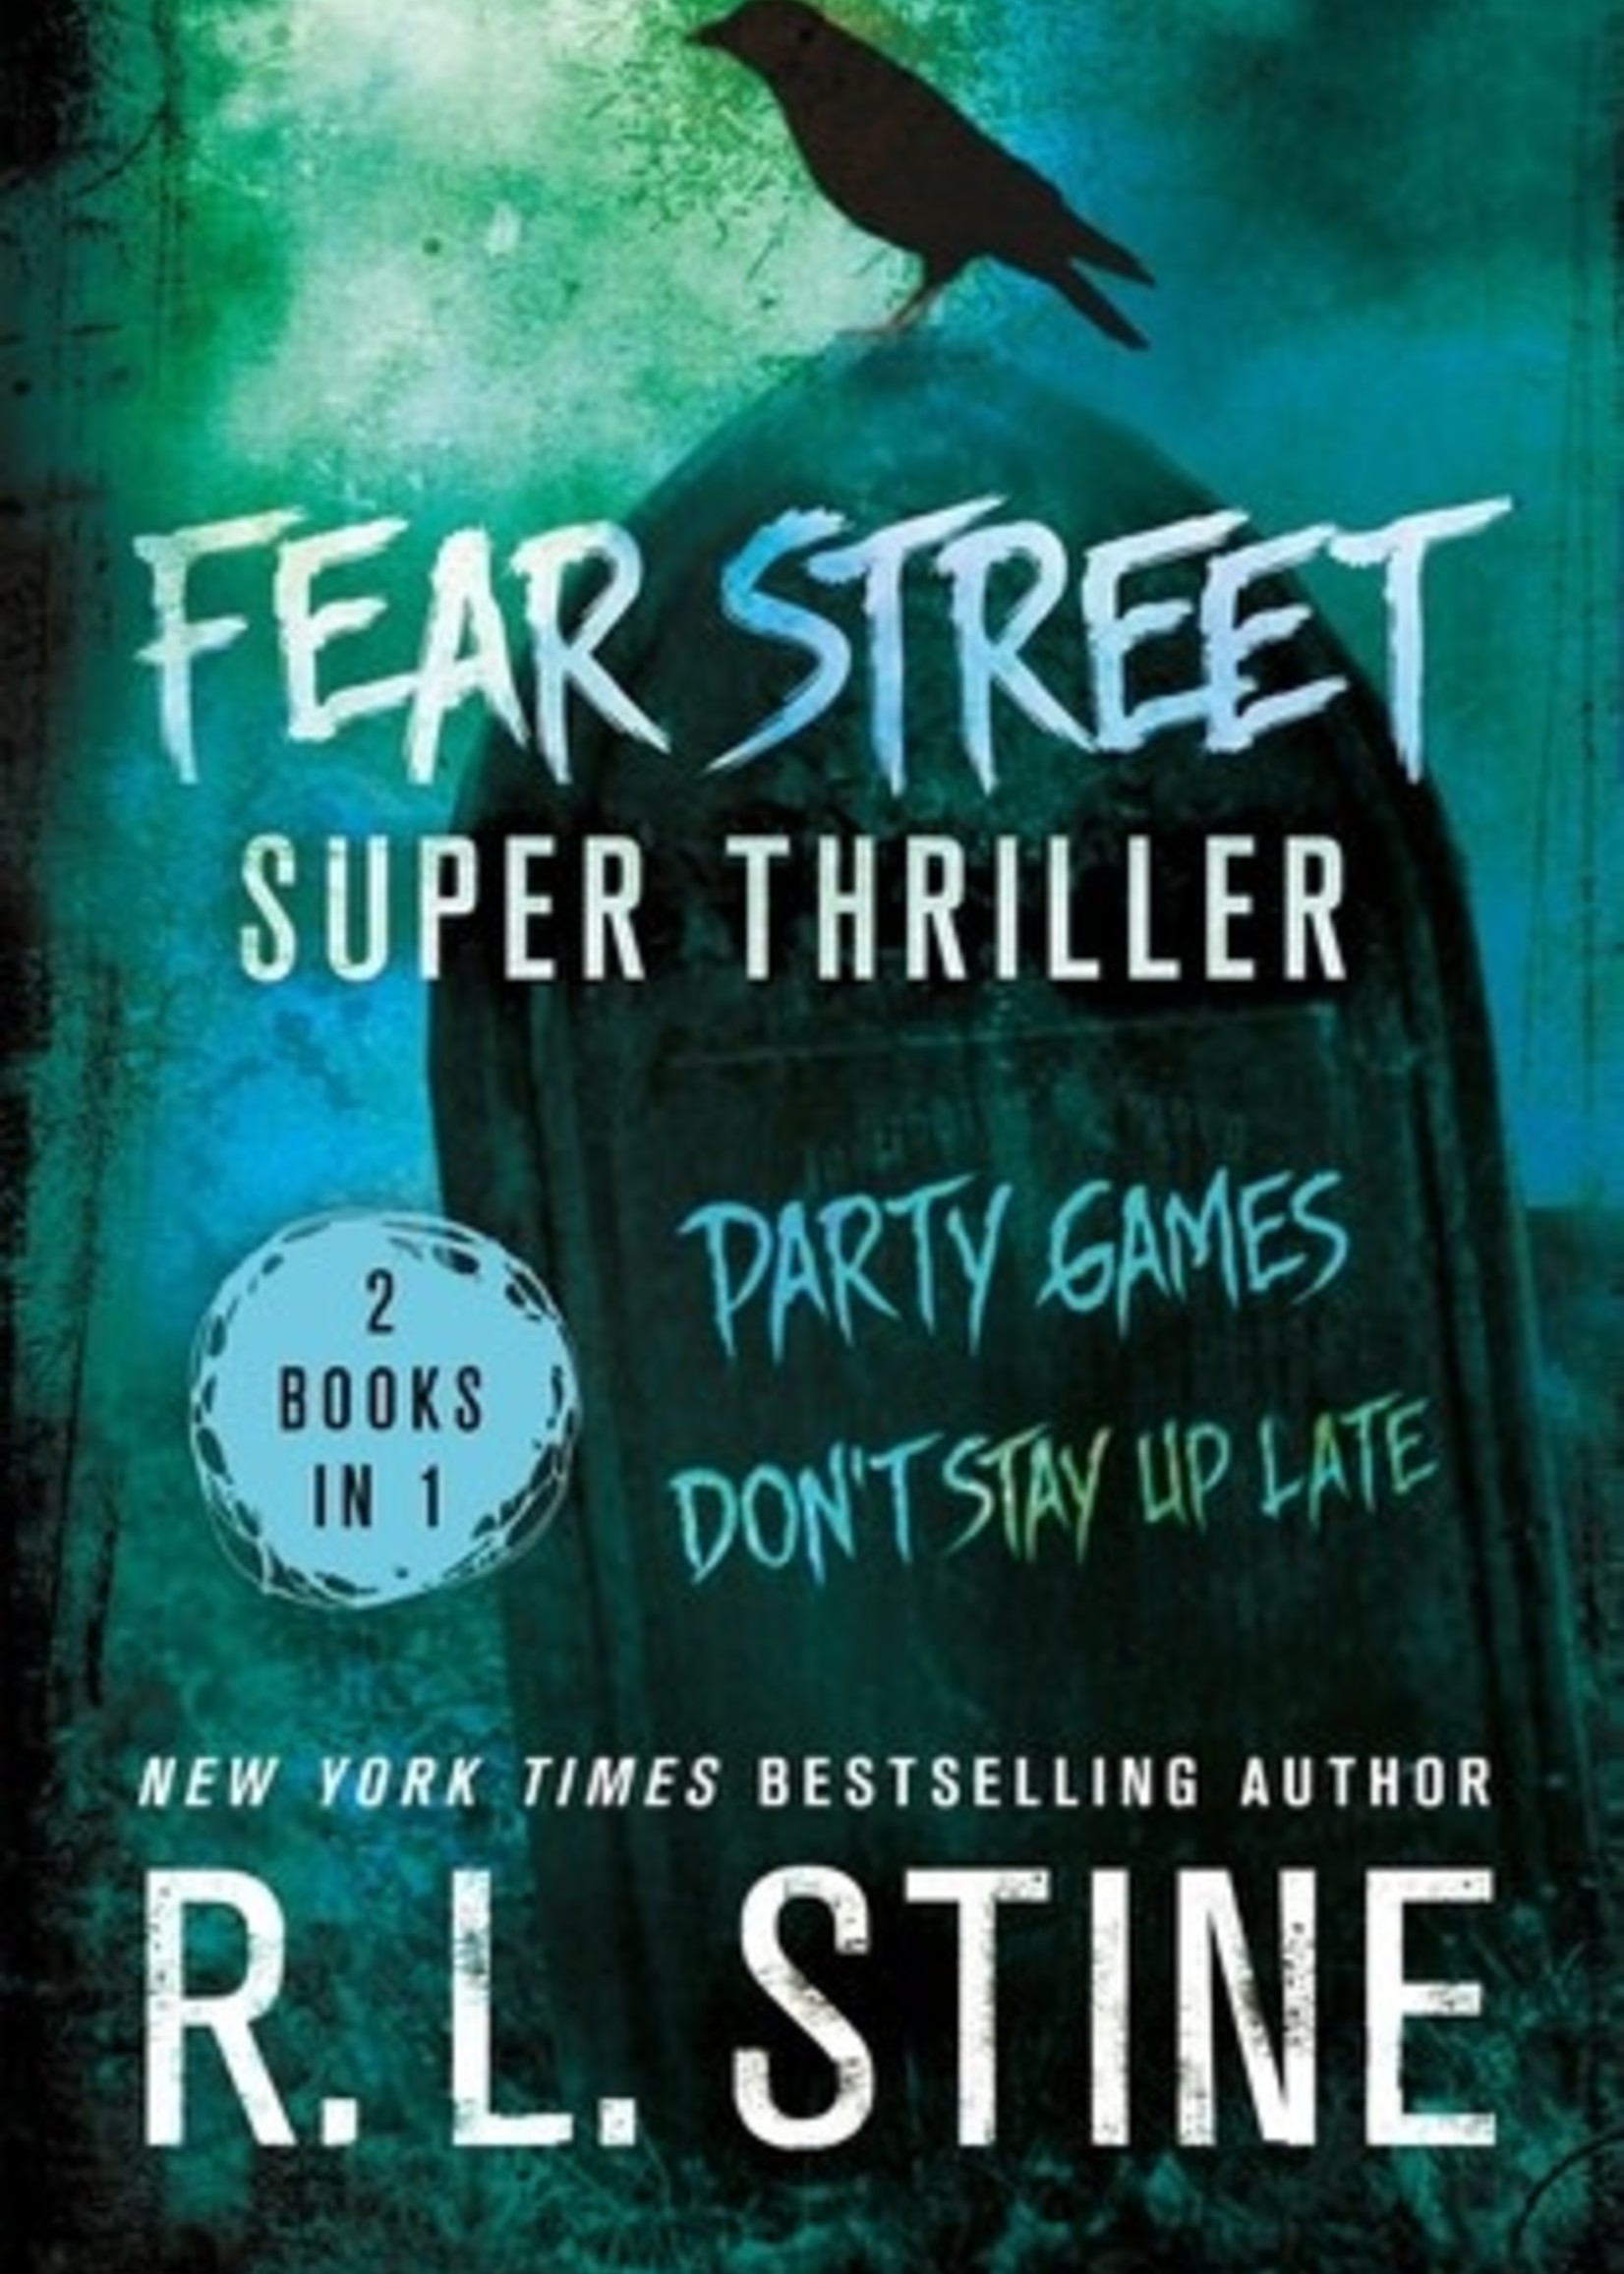 Fear Street Super Thriller: Party Games / Don't Stay Up Late (Fear Street Relaunch #1-2) by R.L. Stine